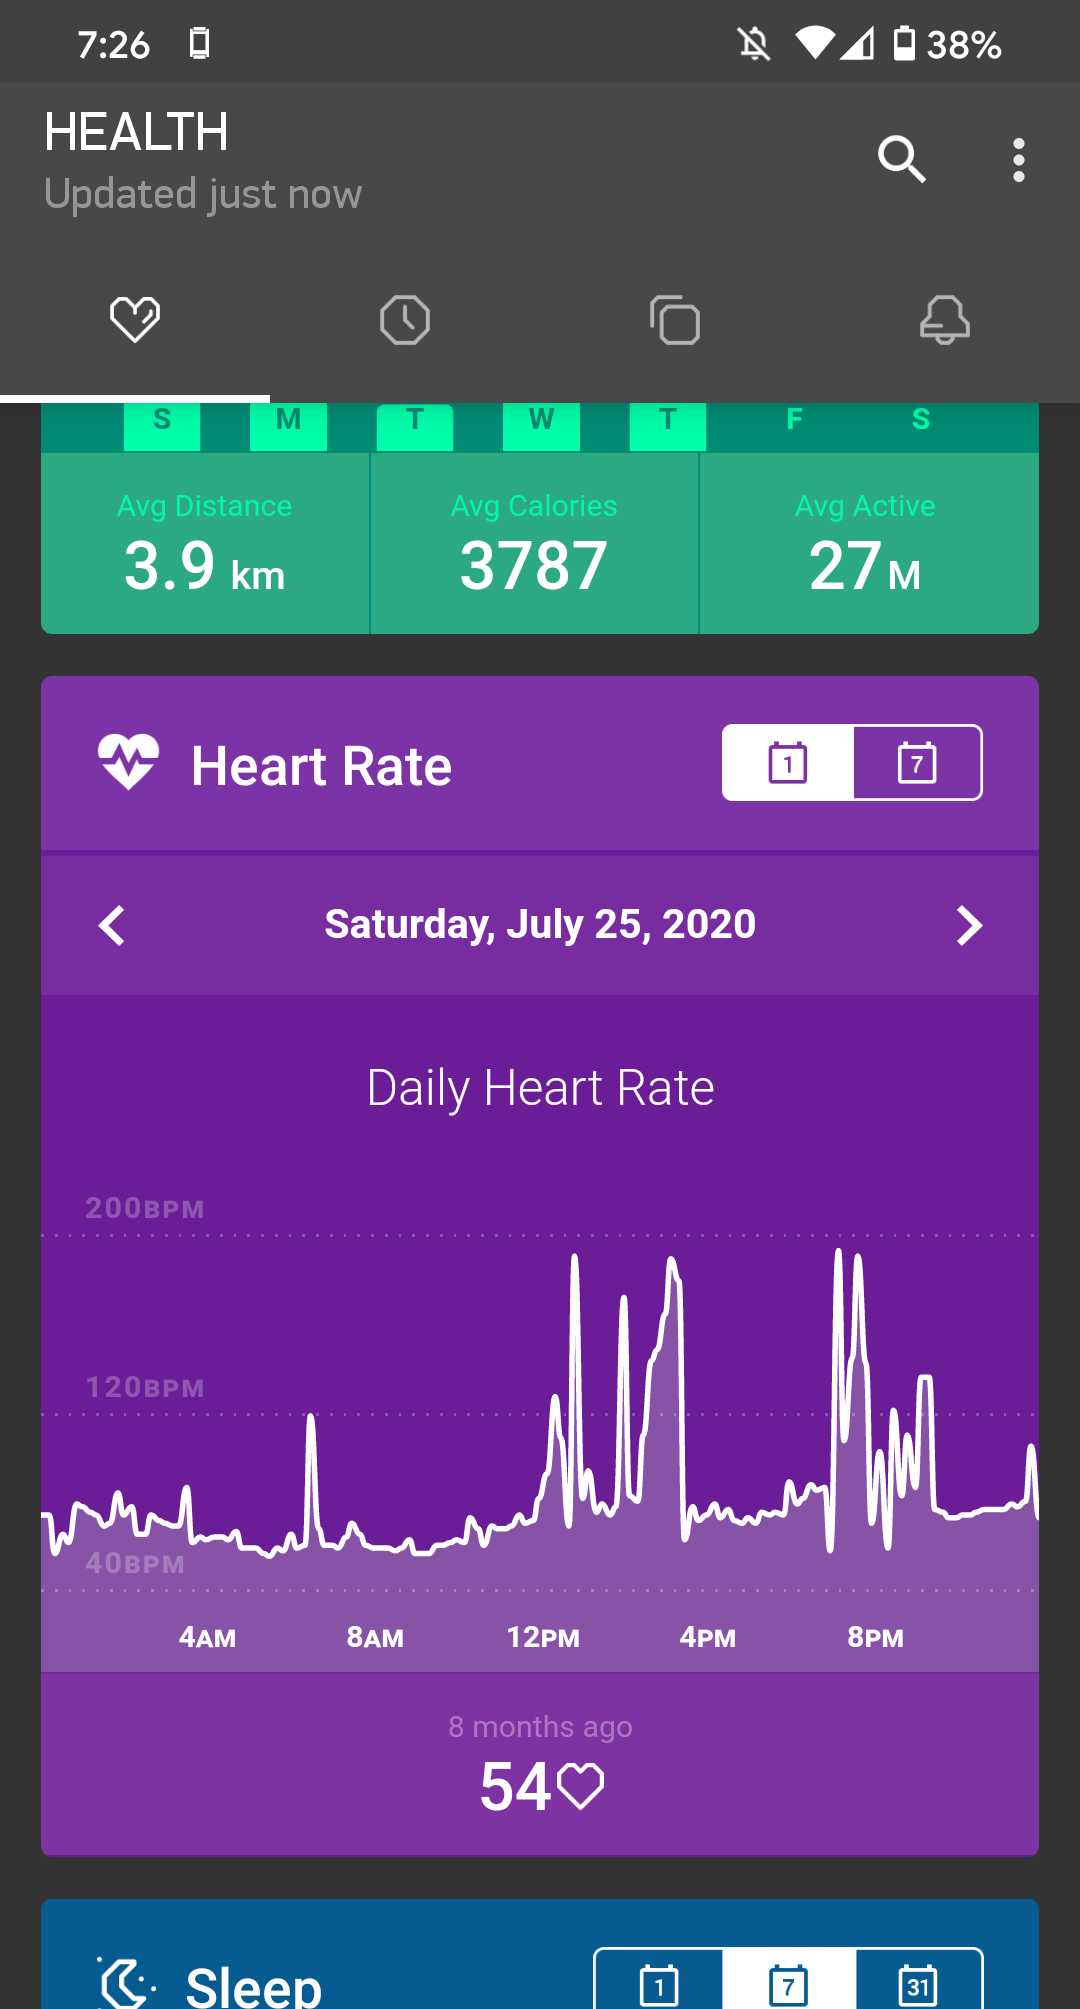 Screenshot of the daily heart rate graph.